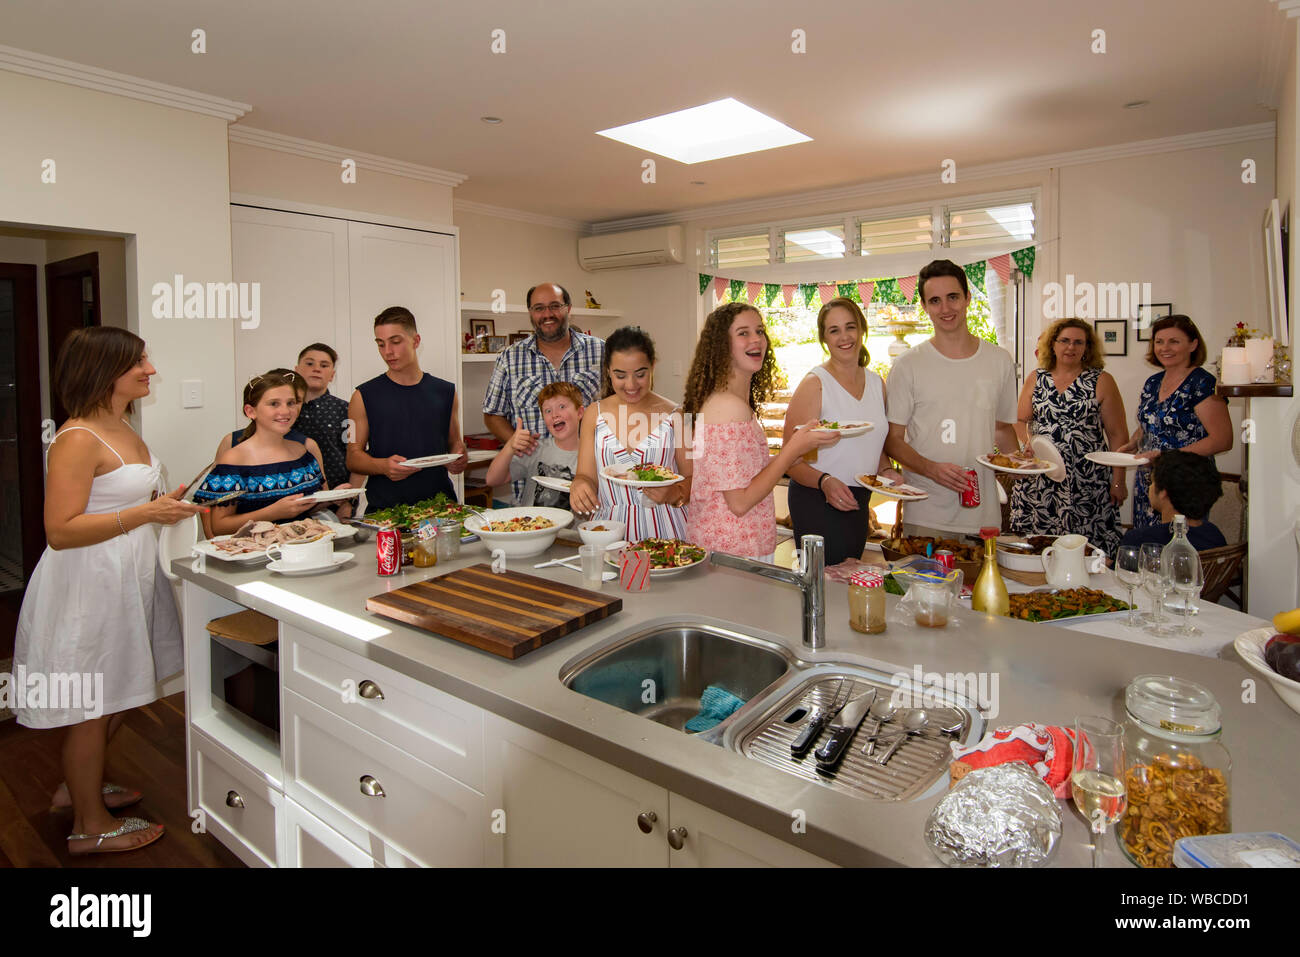 Christmas in Australia, an extended family serves themselves a traditional Australian Christmas lunch of hot meats and vegetables and cold salads Stock Photo